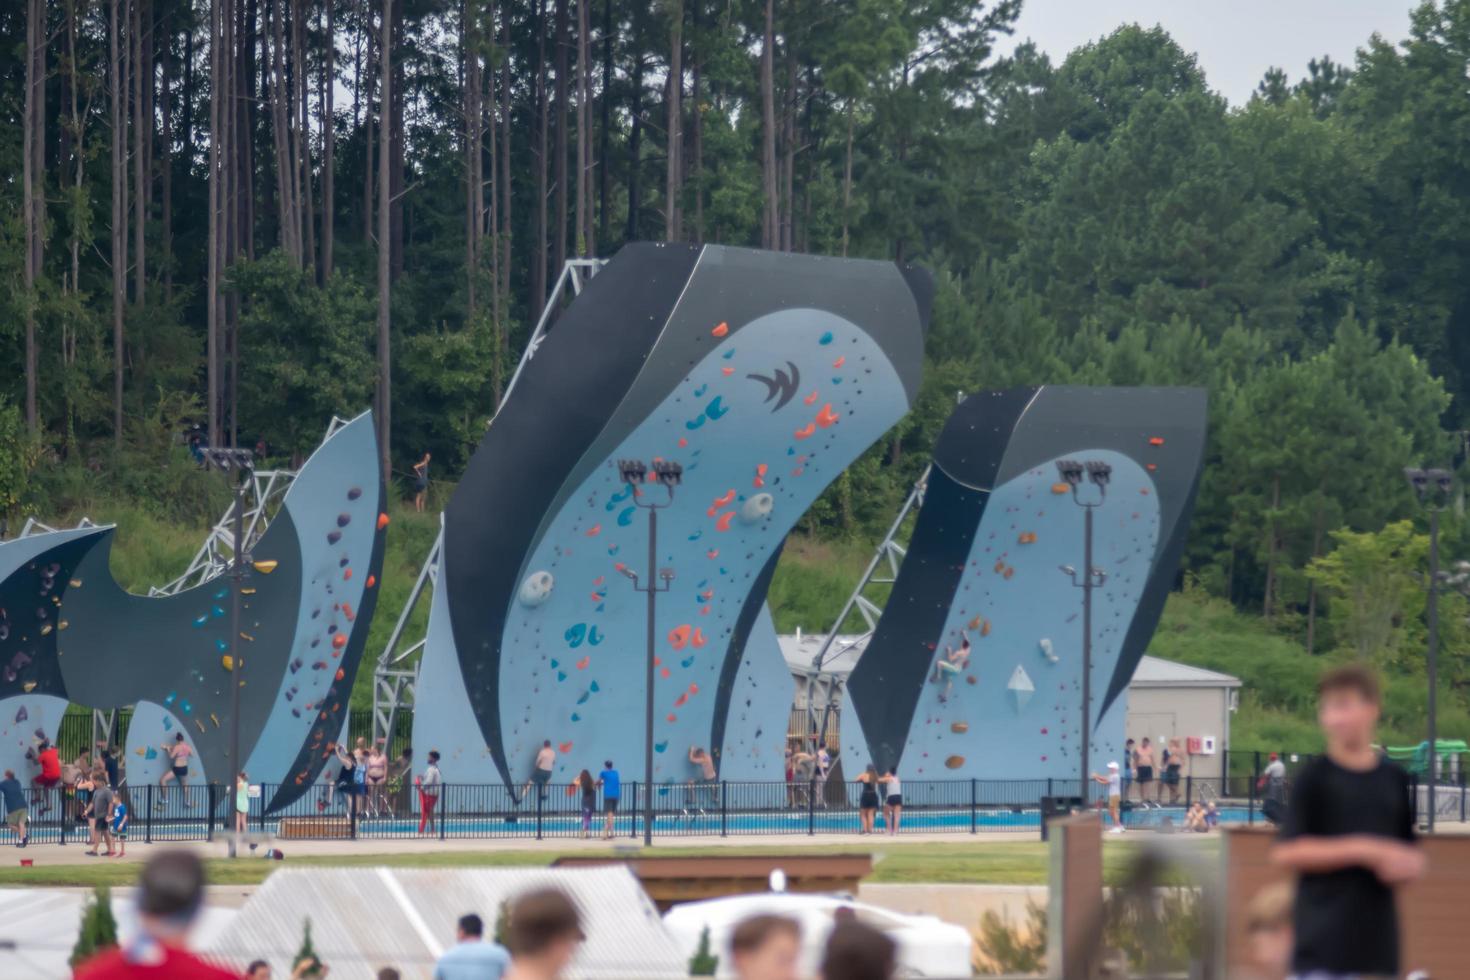 Charlotte, NC, 2021 - People at the U.S. National Whitewater Center photo